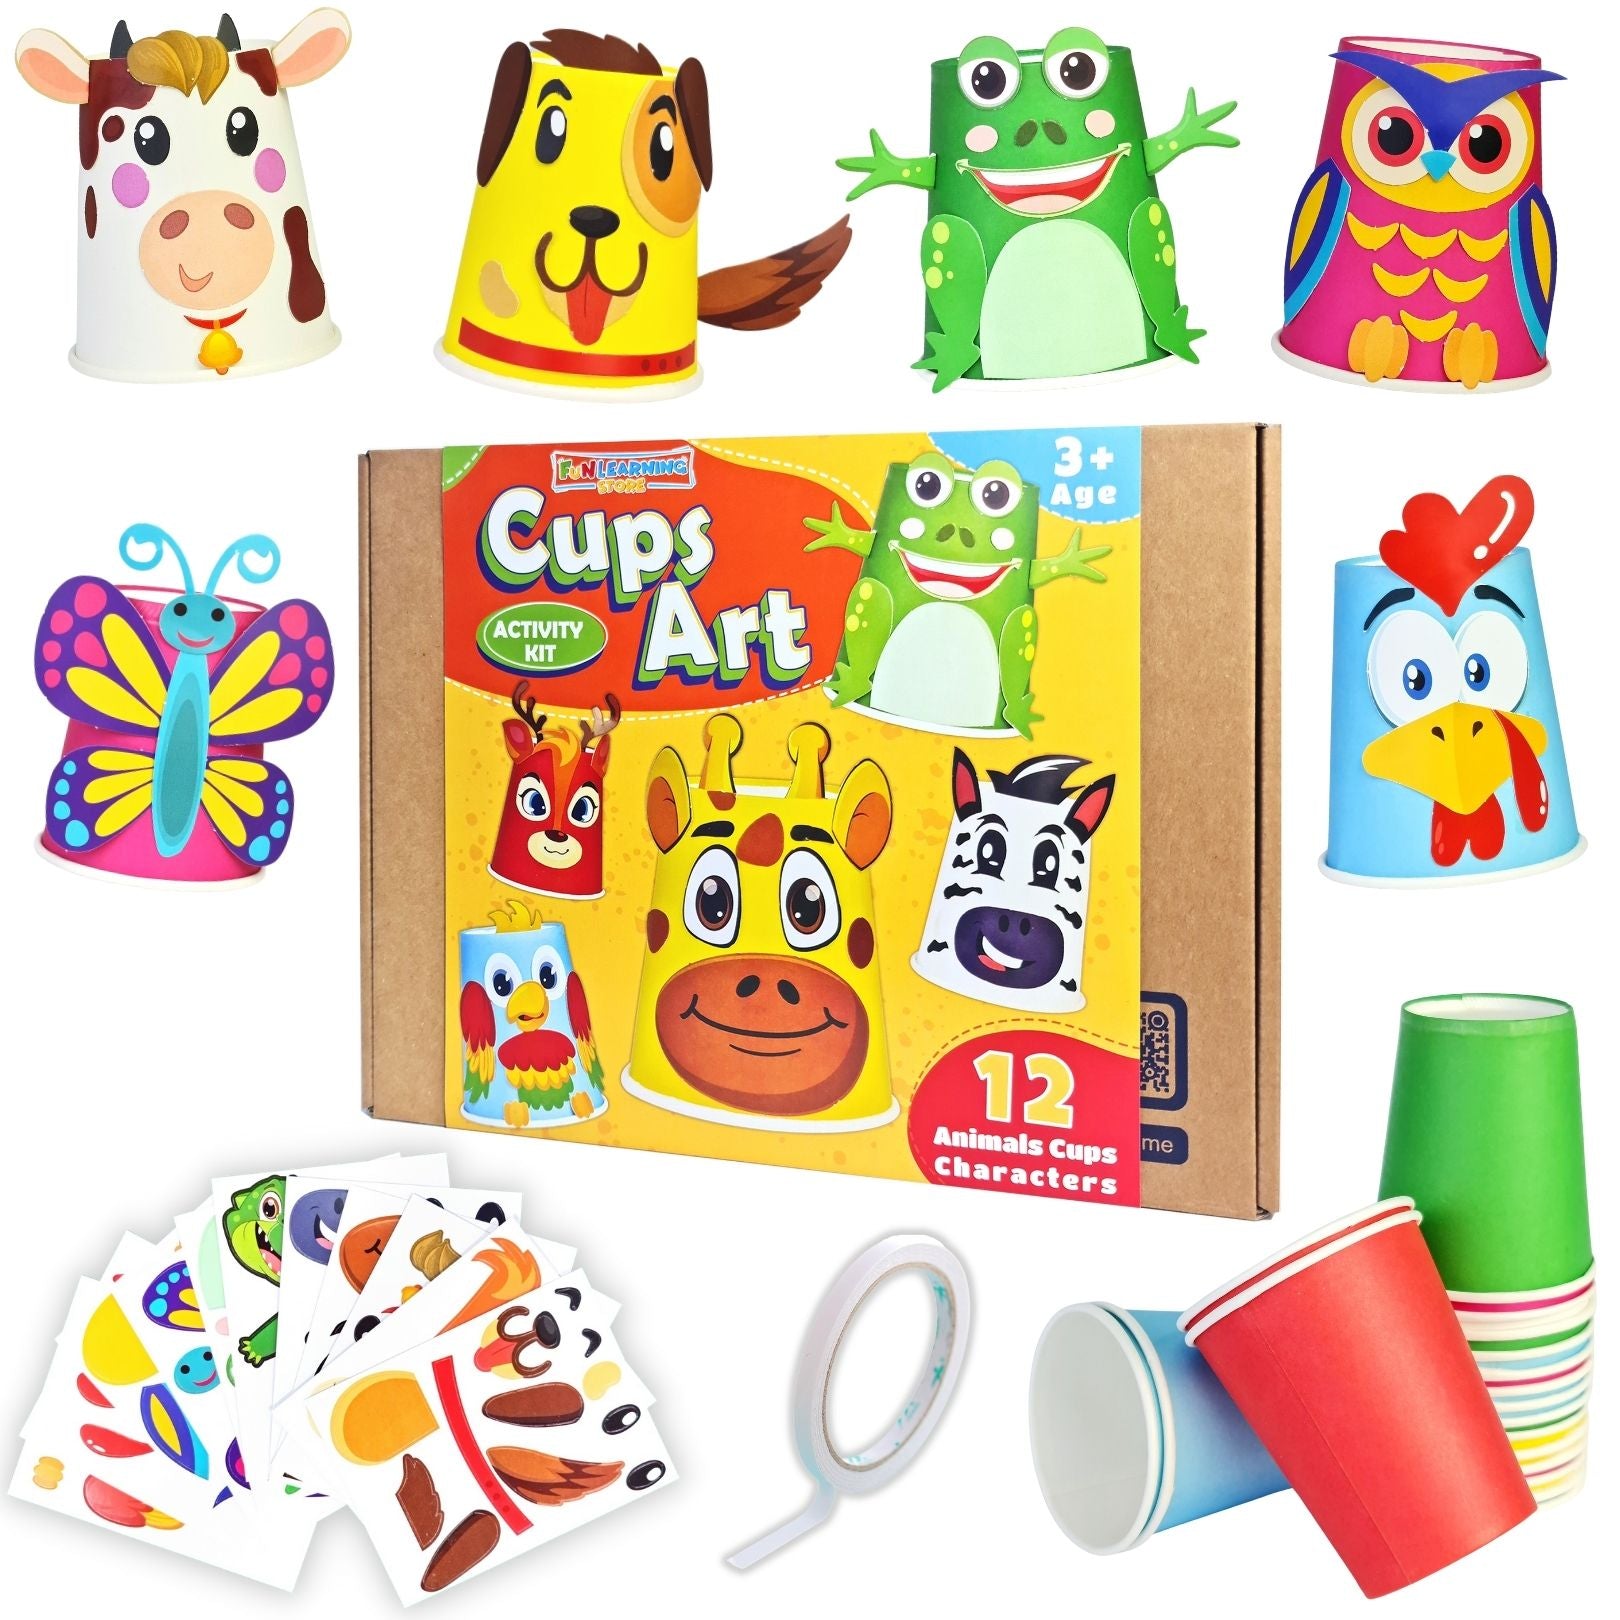 Cups Art Activity Kit For Kids